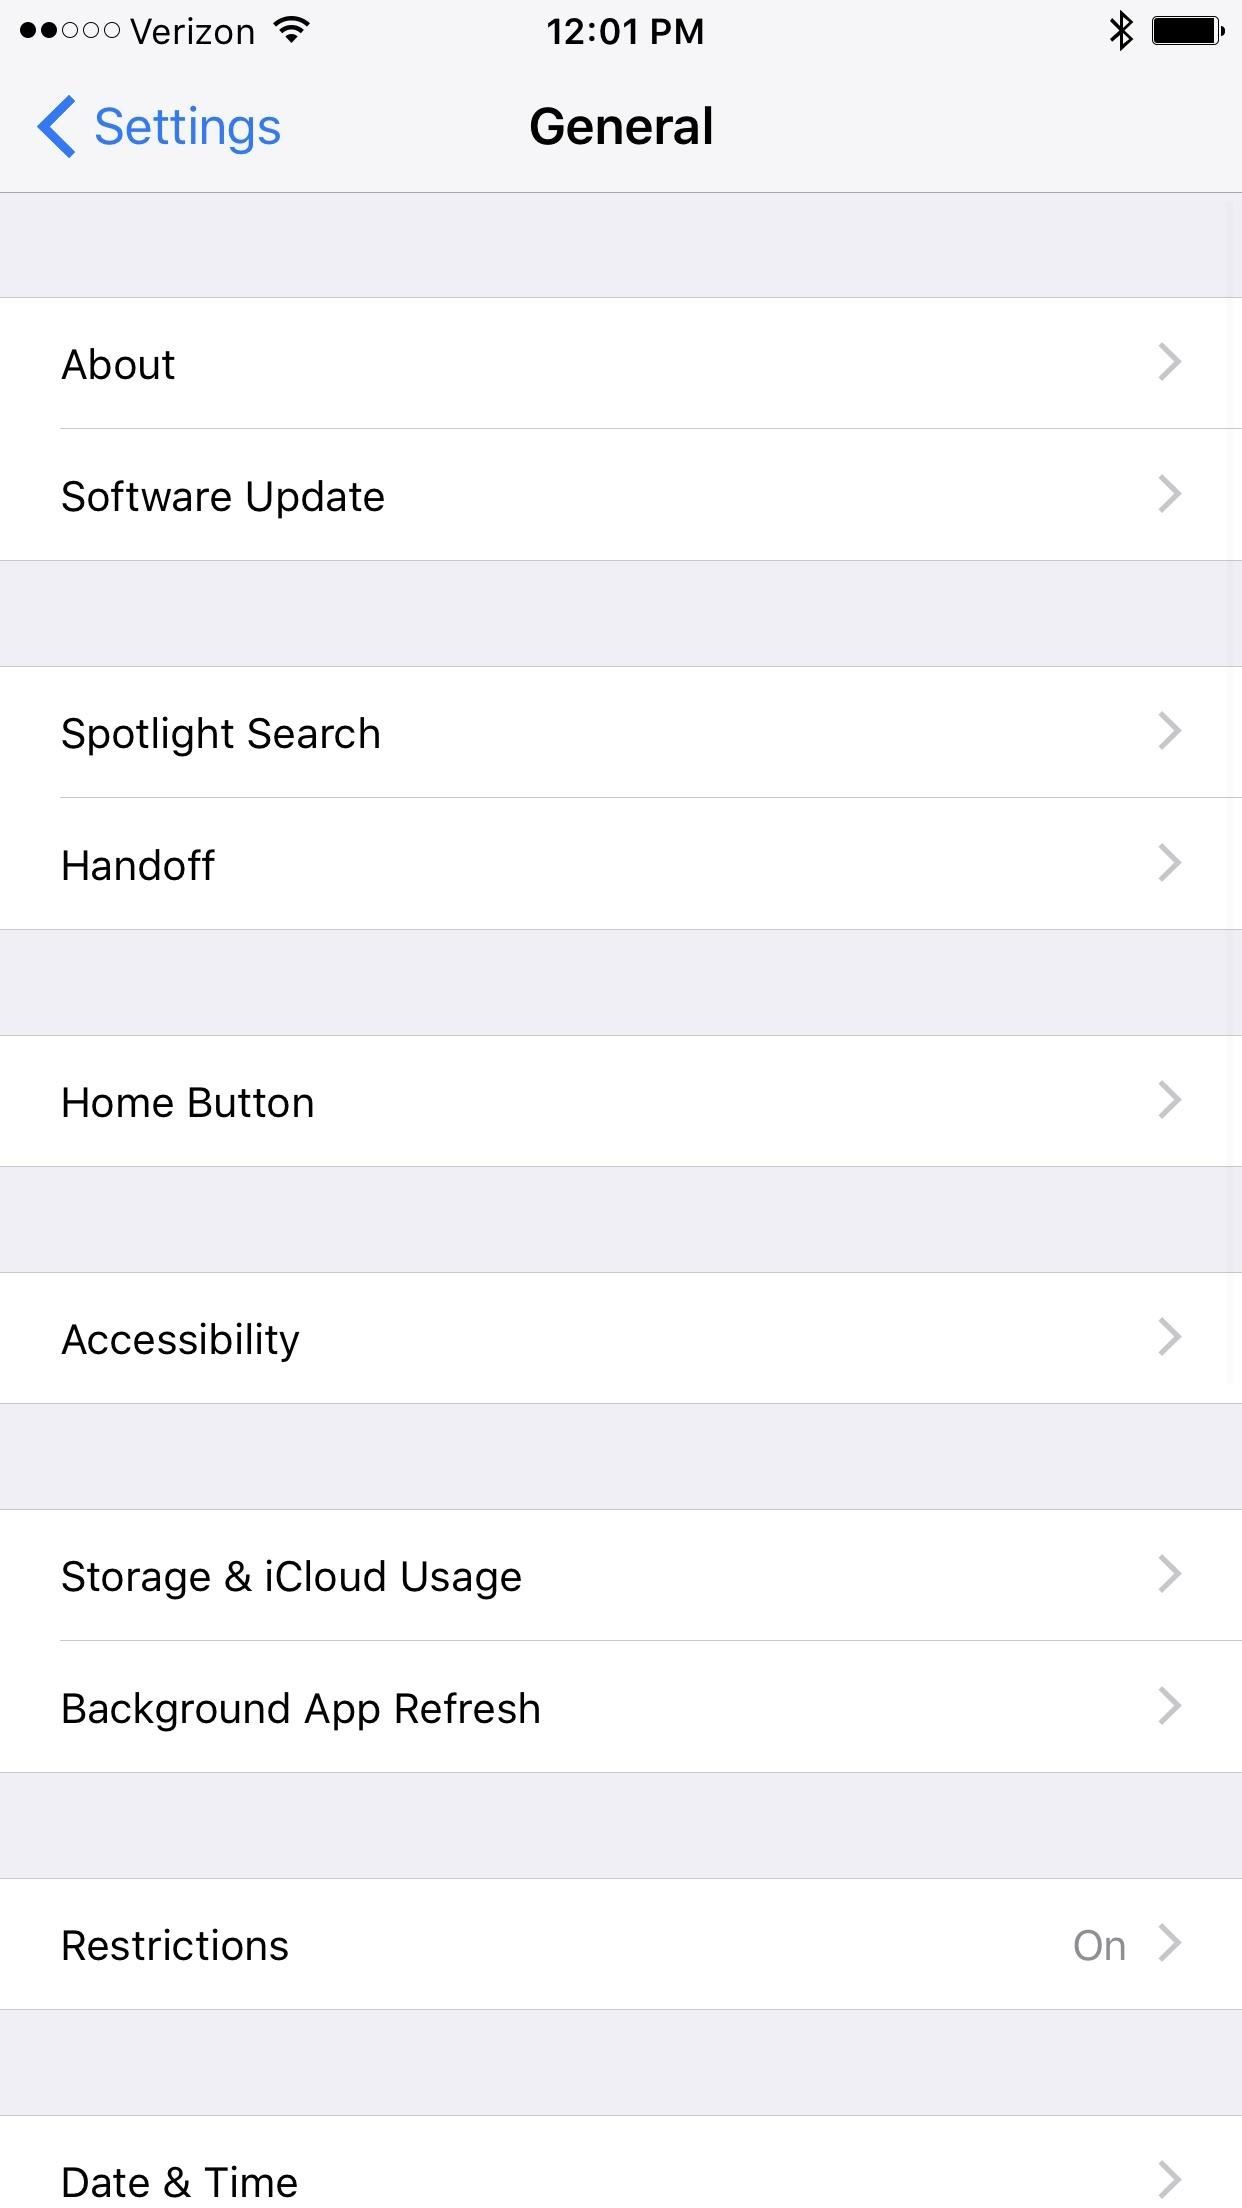 How to Check Your iPhone for 32-Bit Apps That Won't Work in iOS 11